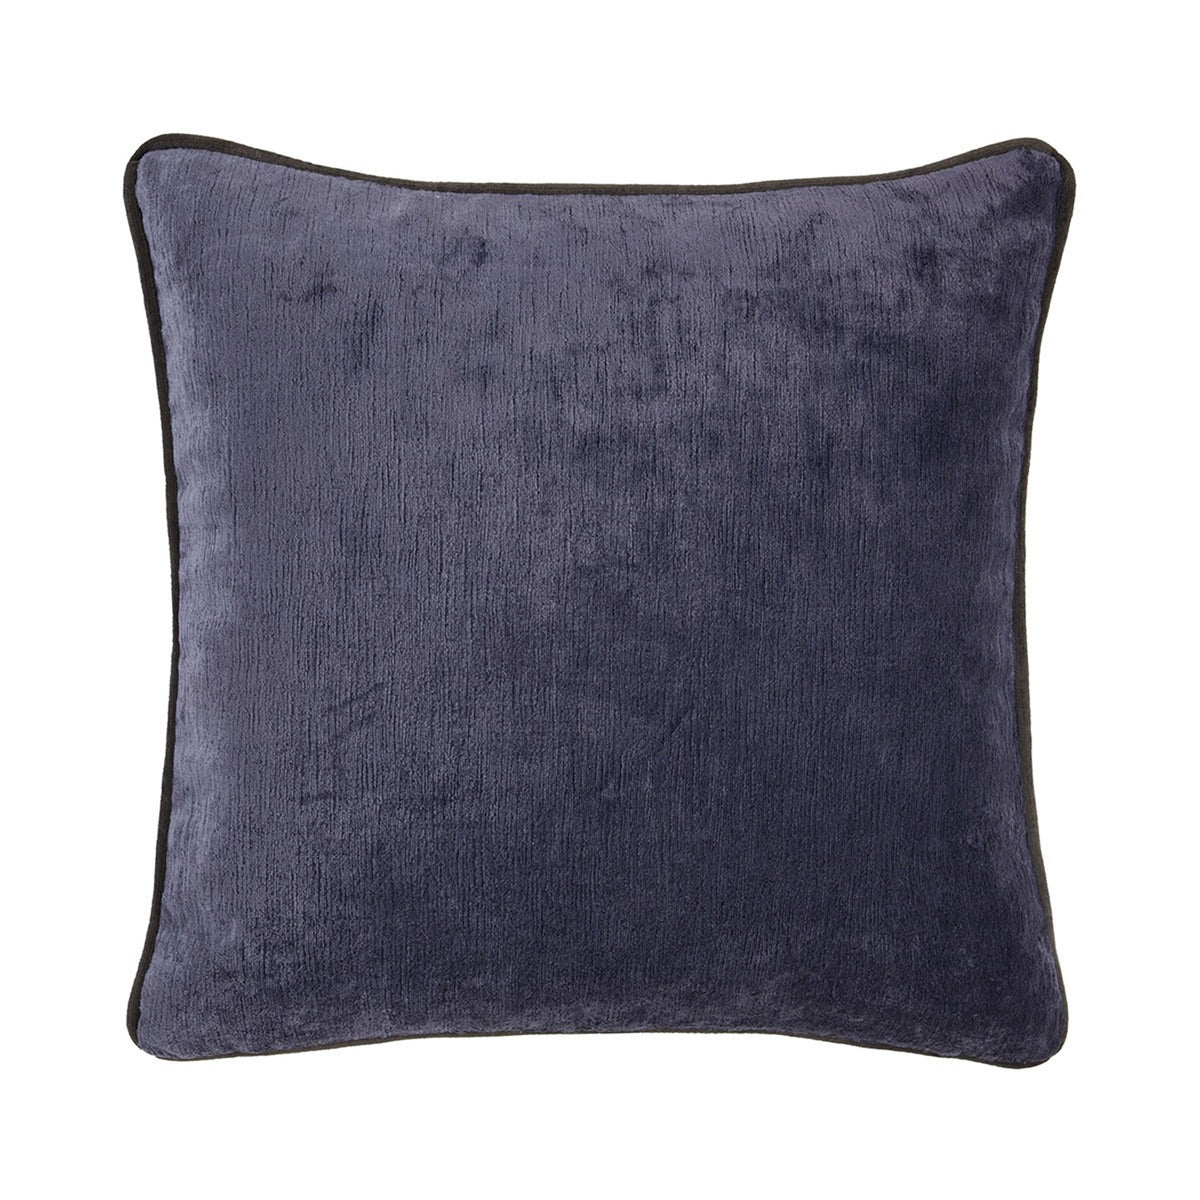 Silo Image of Yves Delorme Iosis Boromee Square Decorative Pillow in Encre Color